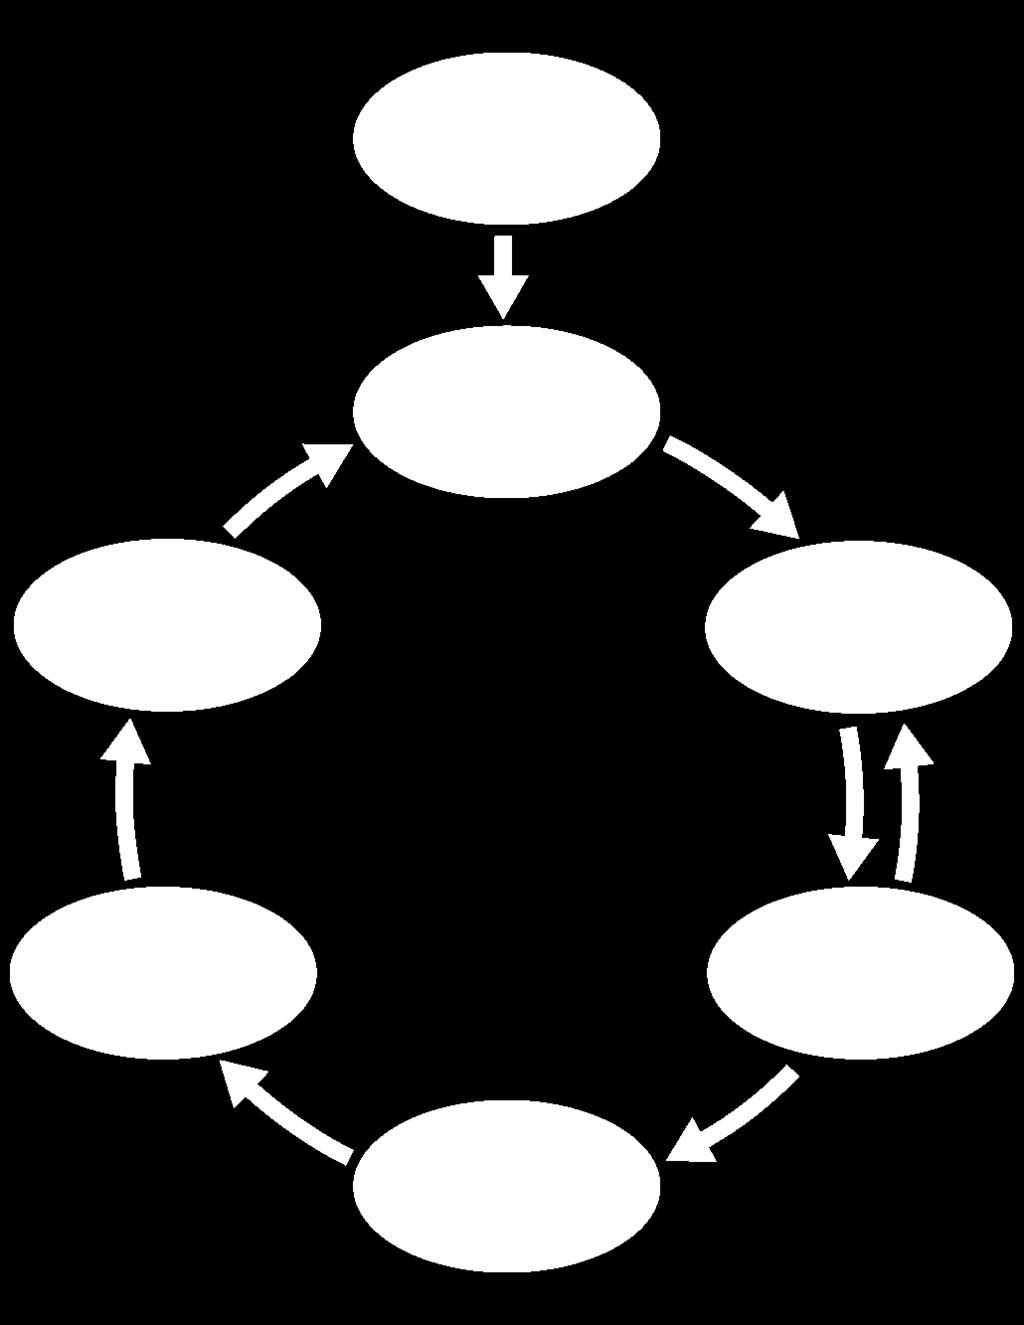 The language used in the diagram above is one of many possible ways to describe the SPI process.